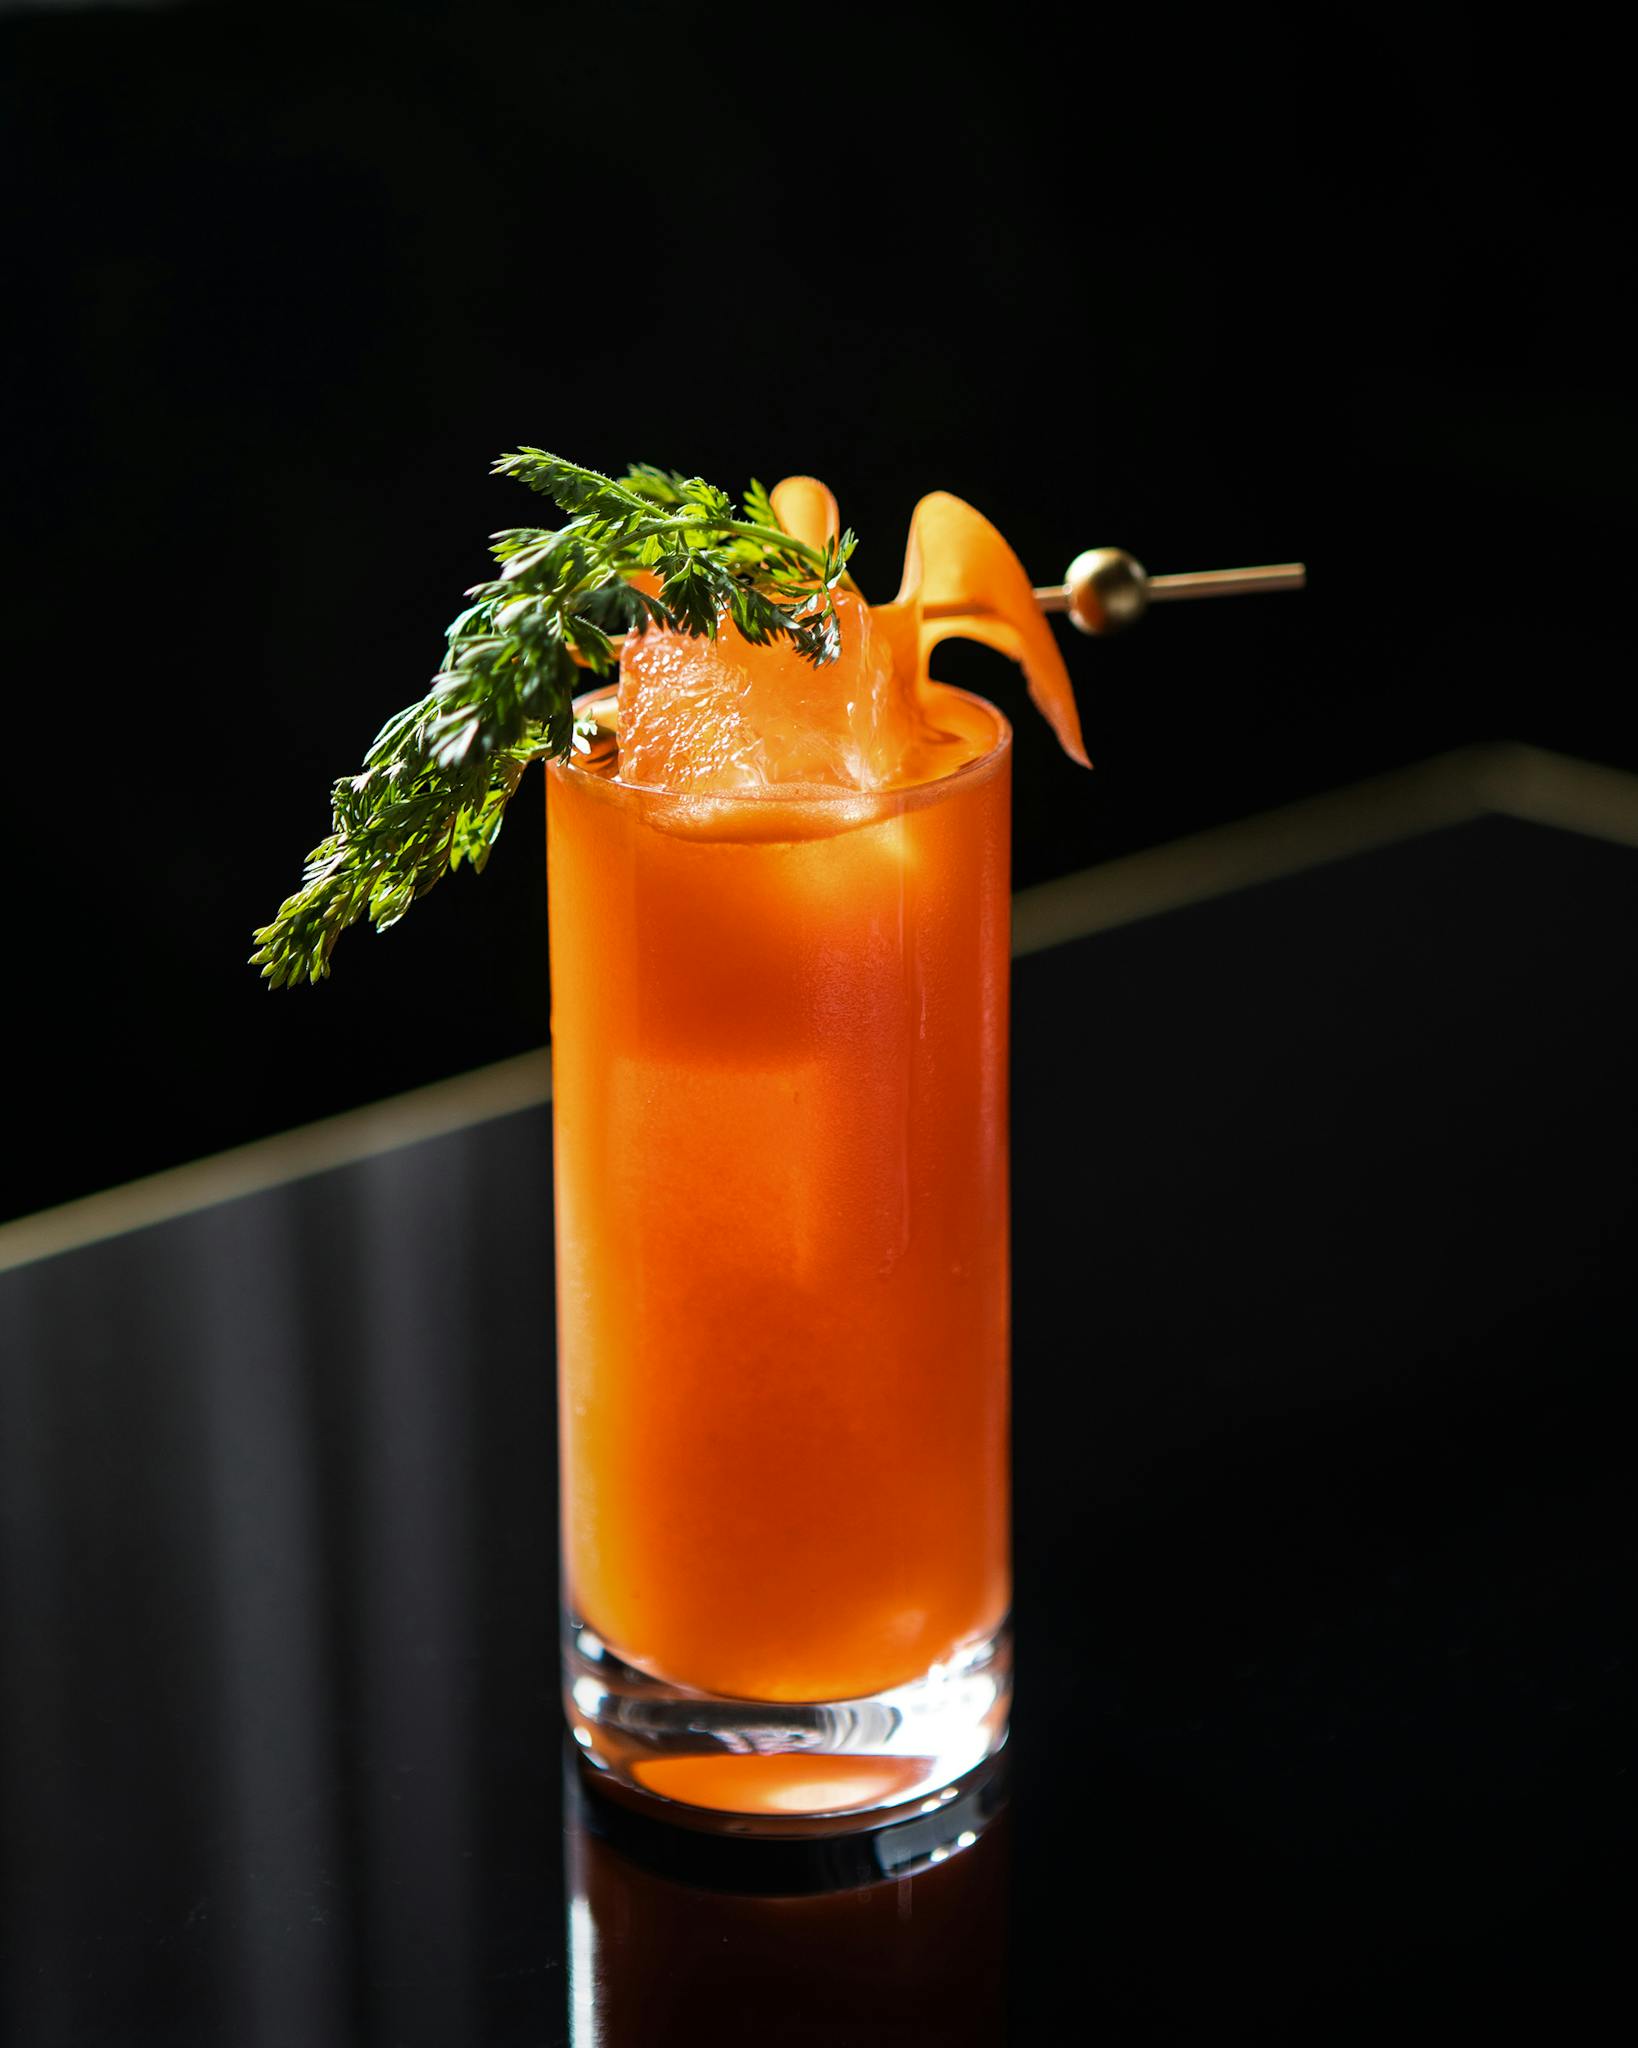 Inventive cocktails are garnished with herbs from the hotel’s new kitchen garden and served at the newly expanded bar.